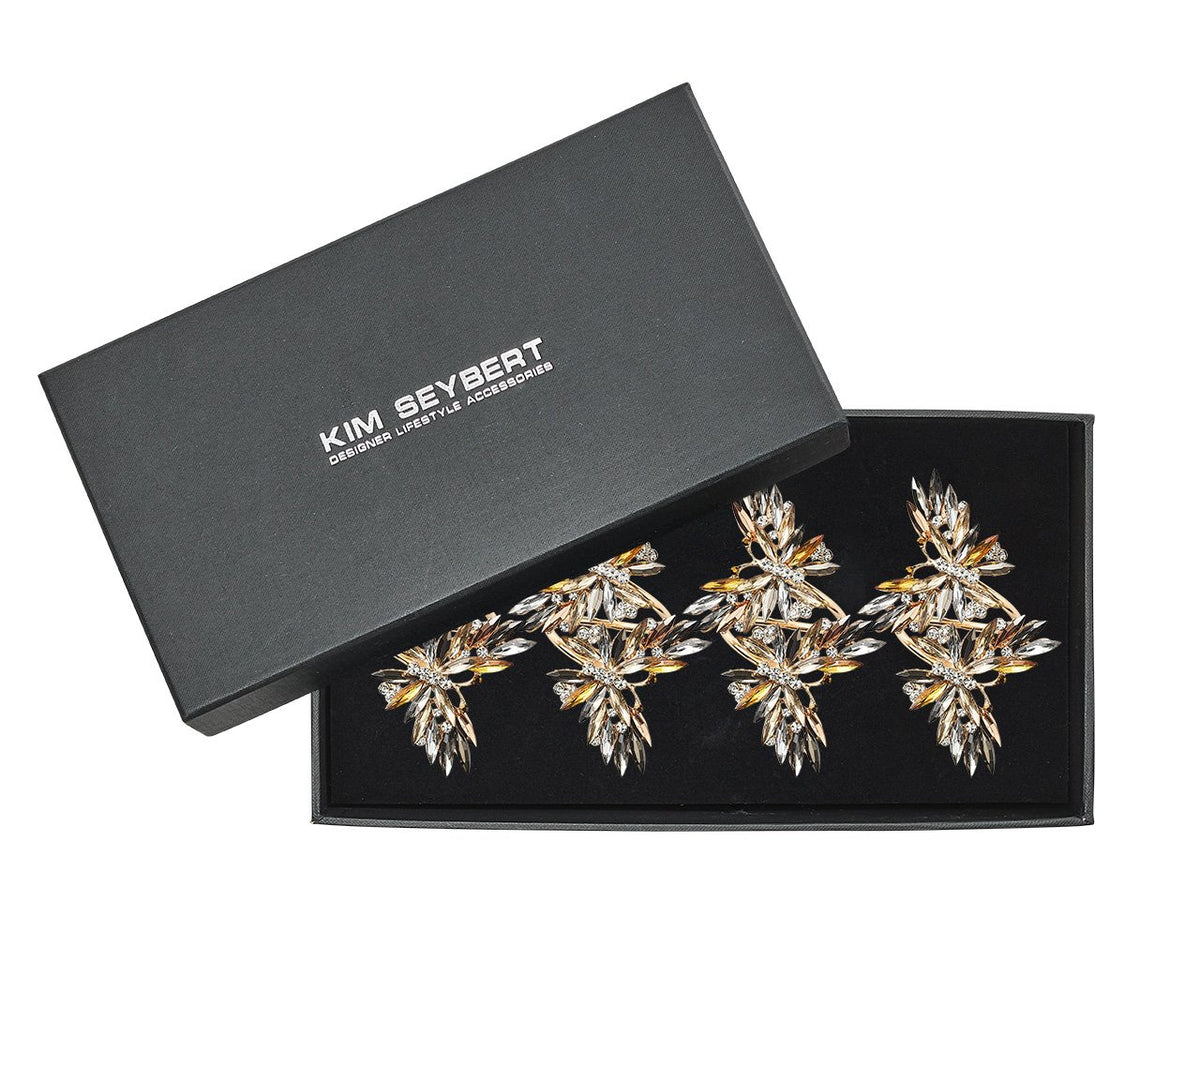 Butterflies Napkin Ring in Champagne & Crystal, Set of 4, in a Gift Box by Kim Seybert